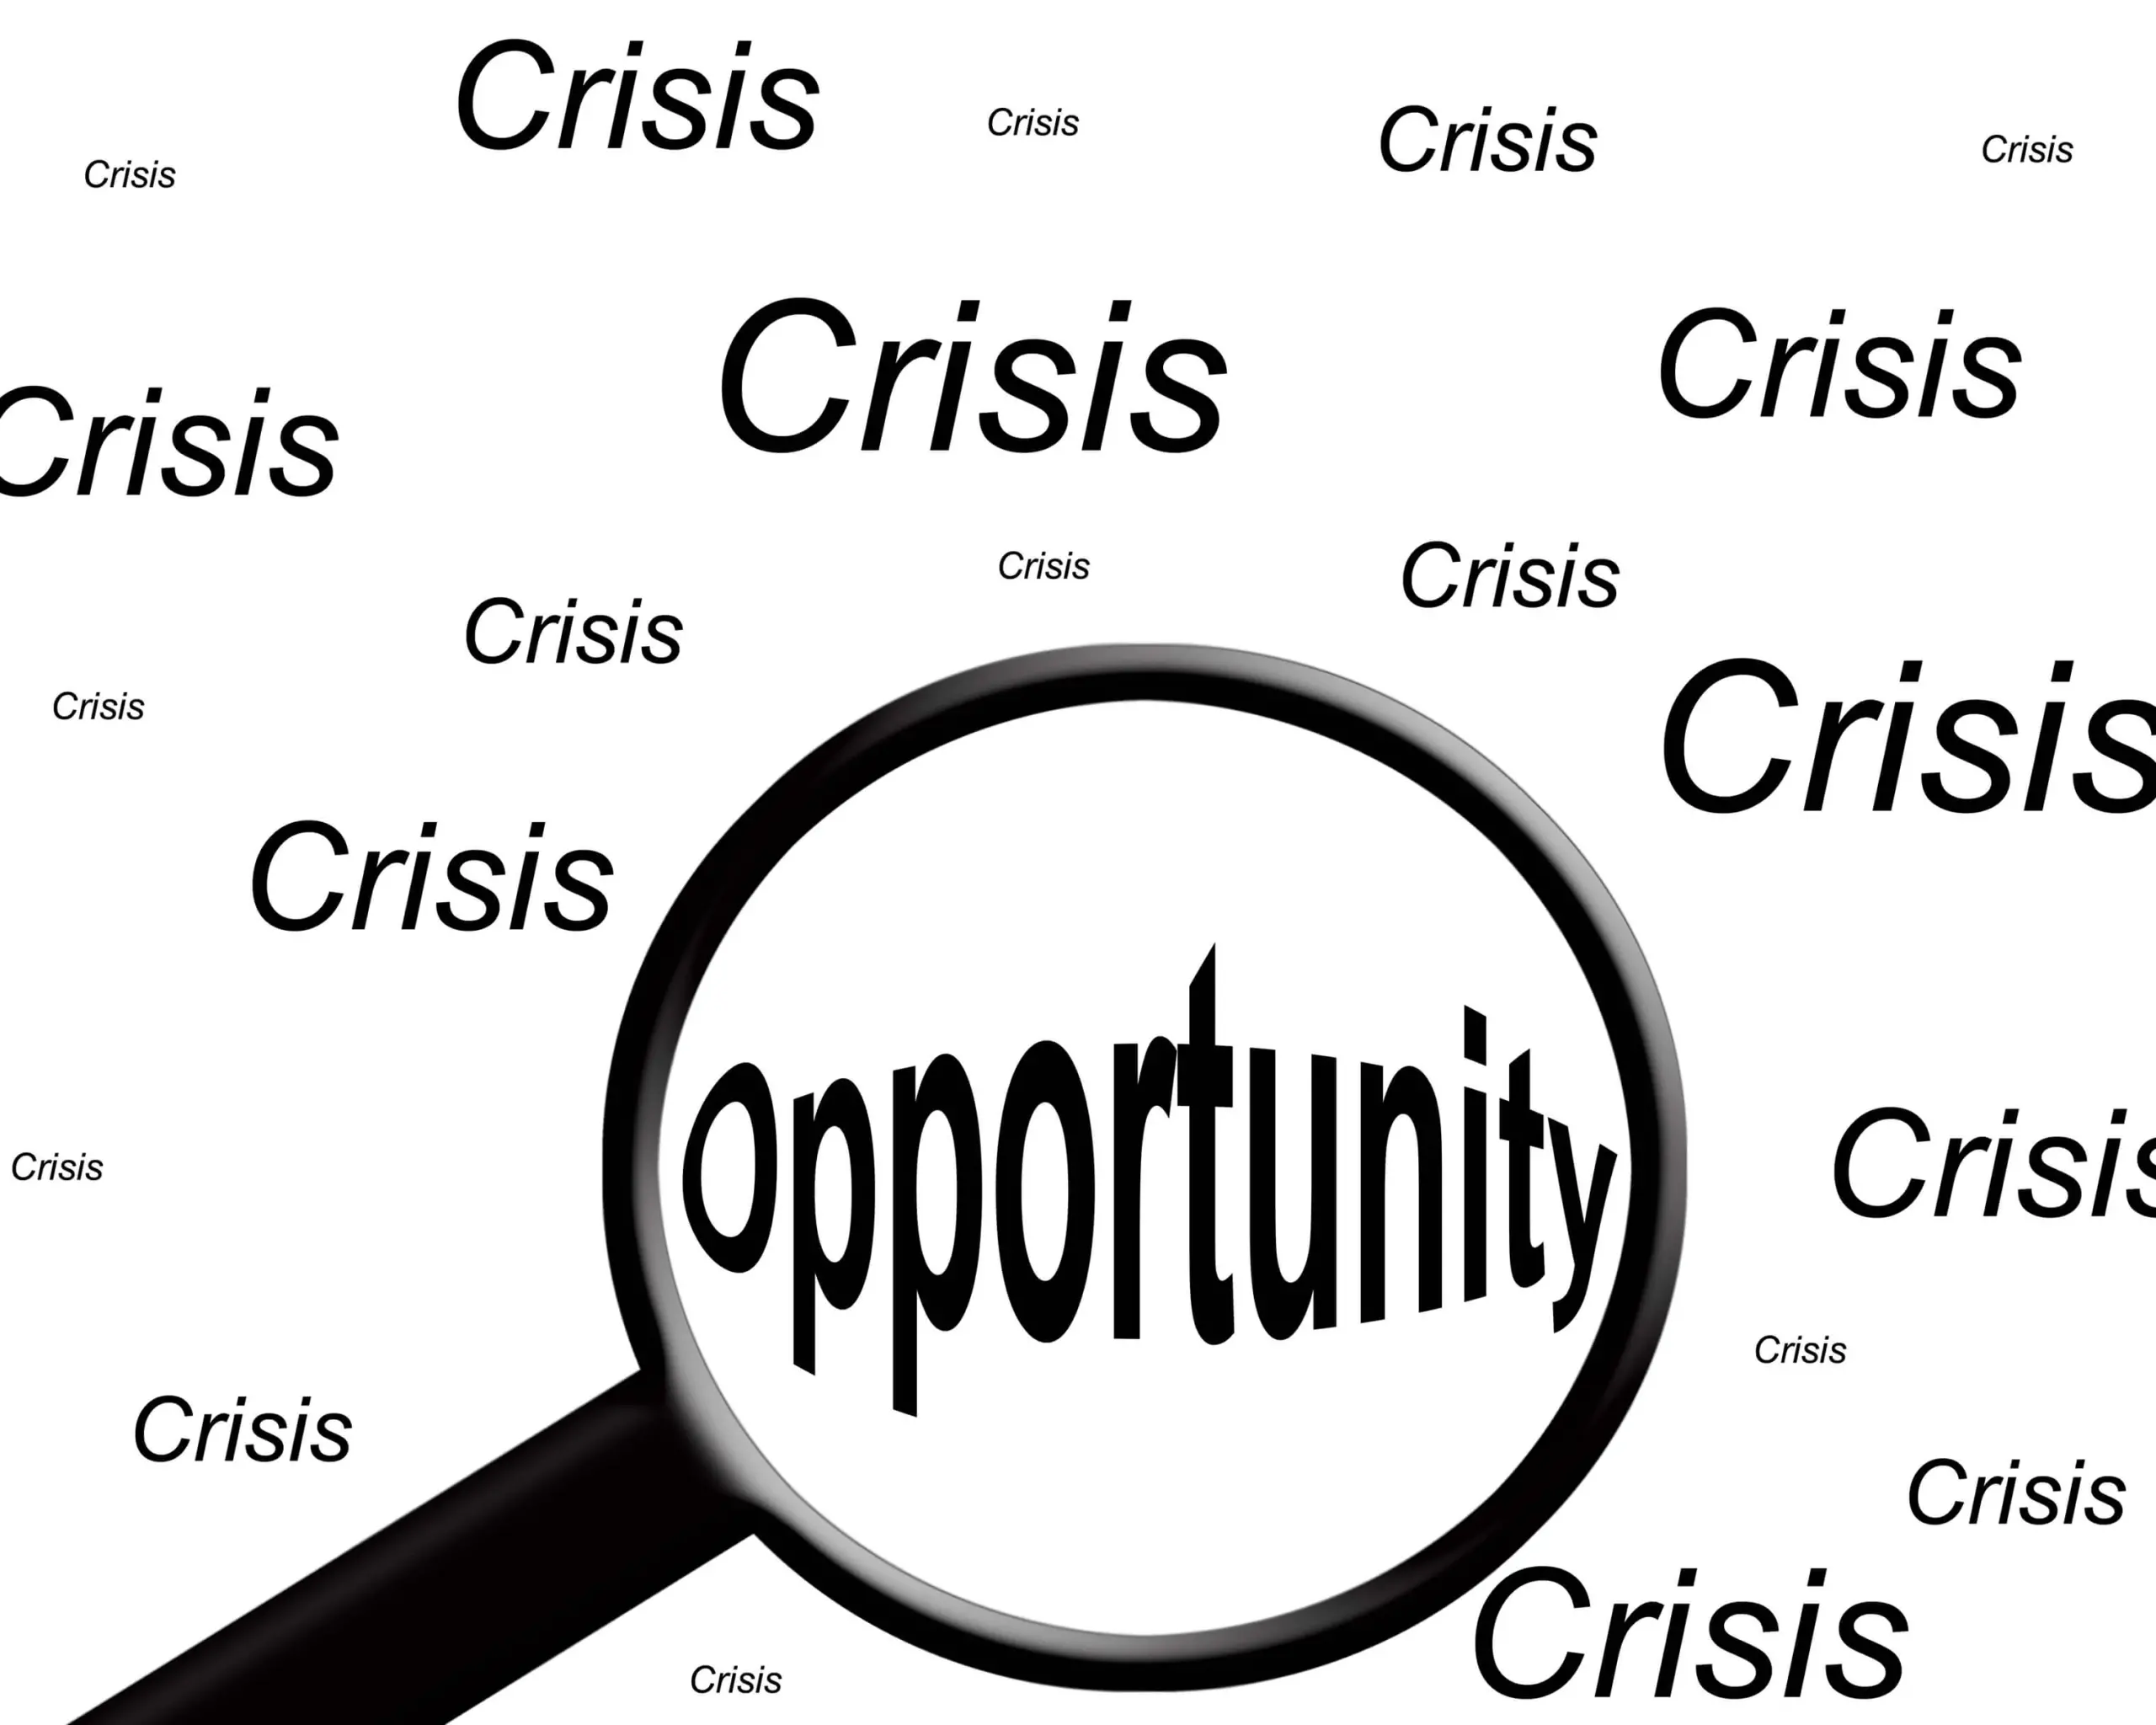 Finding Opportunity Amid the Crisis: Dealing with COVID-19